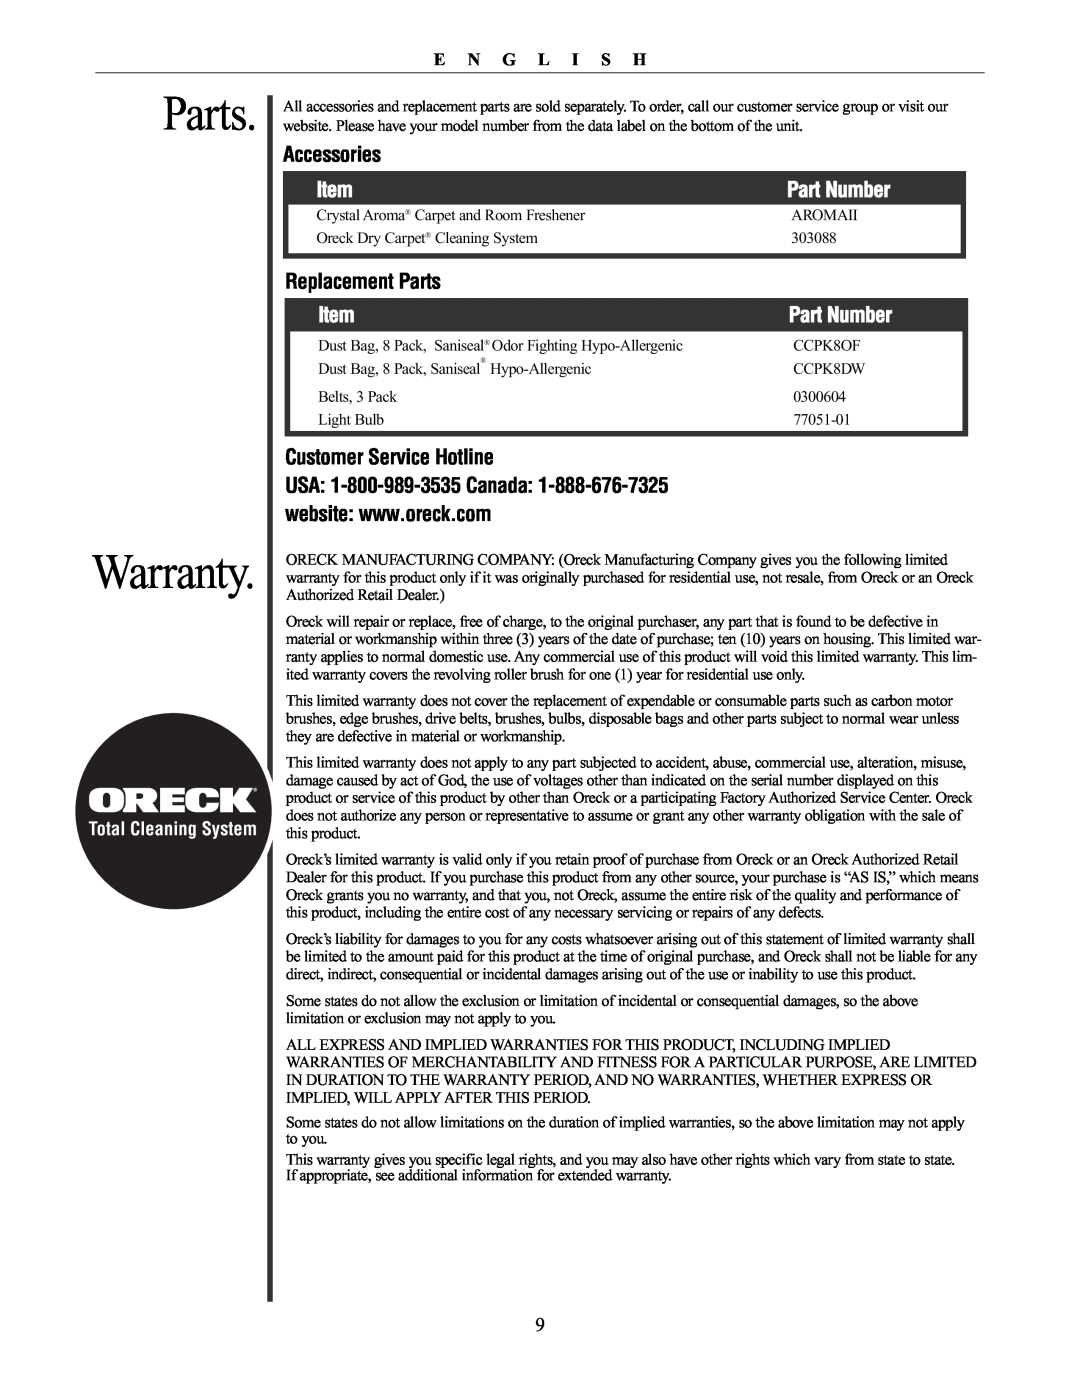 Oreck 76011-01REVC Parts Warranty, Accessories, Part Number, Replacement Parts, Customer Service Hotline, E N G L I S H 